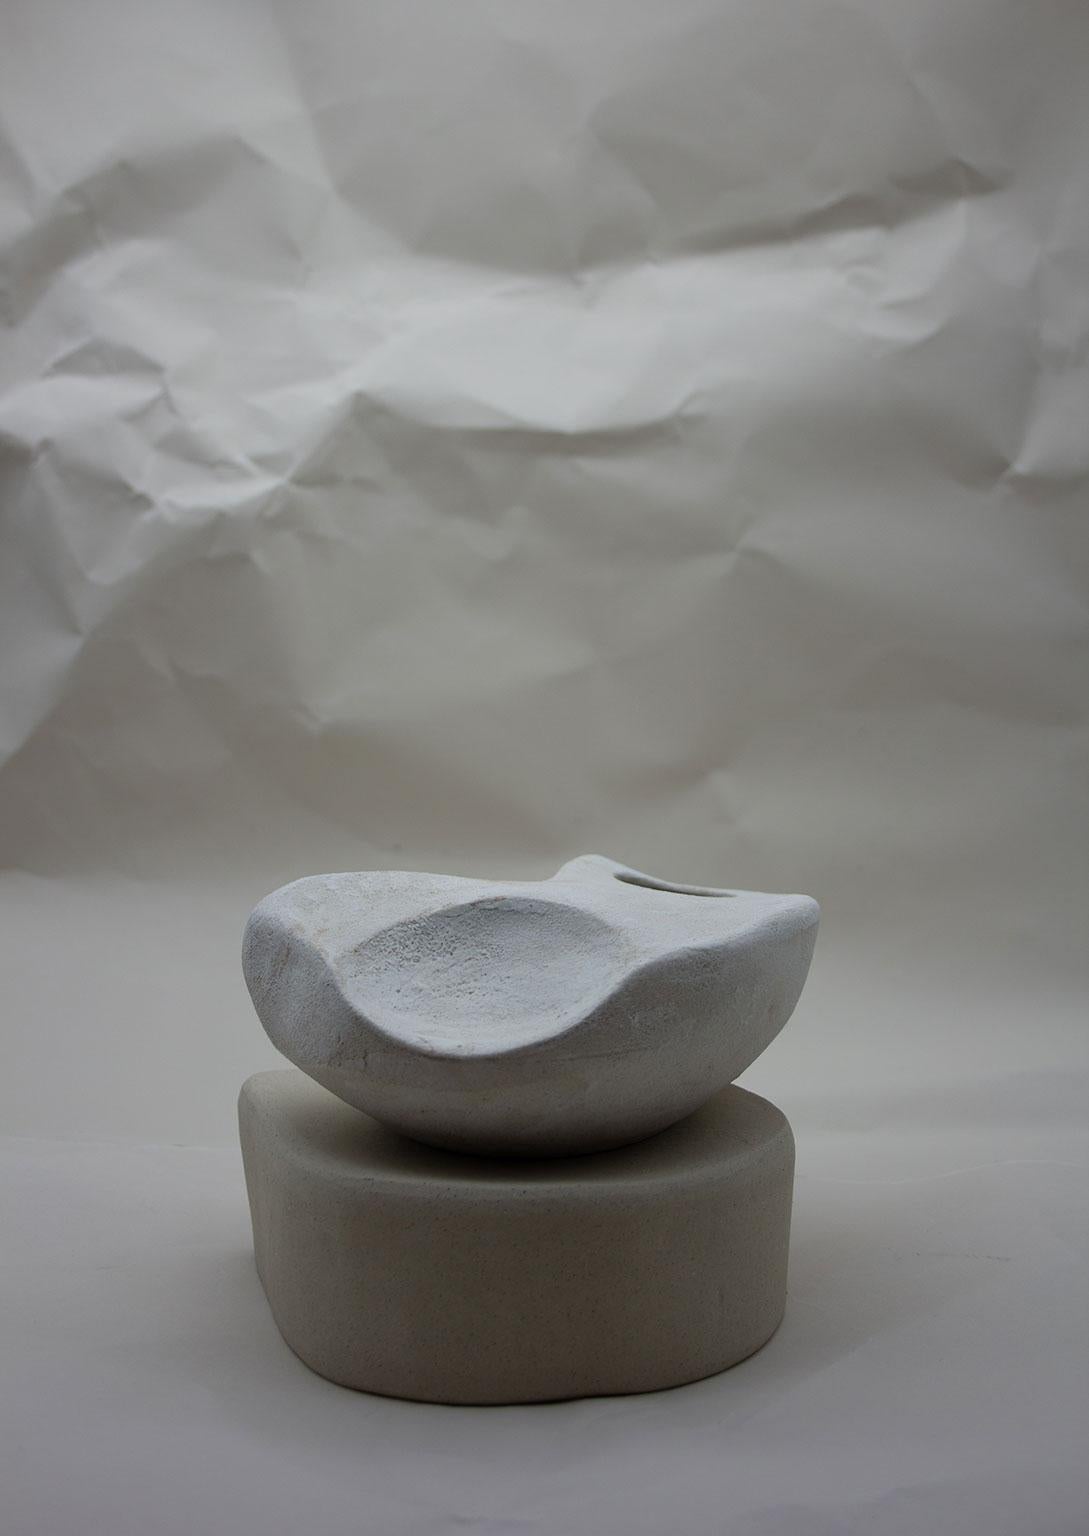 Ceramic Small Curved Form with Hip and Plinth, Stoneware and Porcelain Slip Sculpture